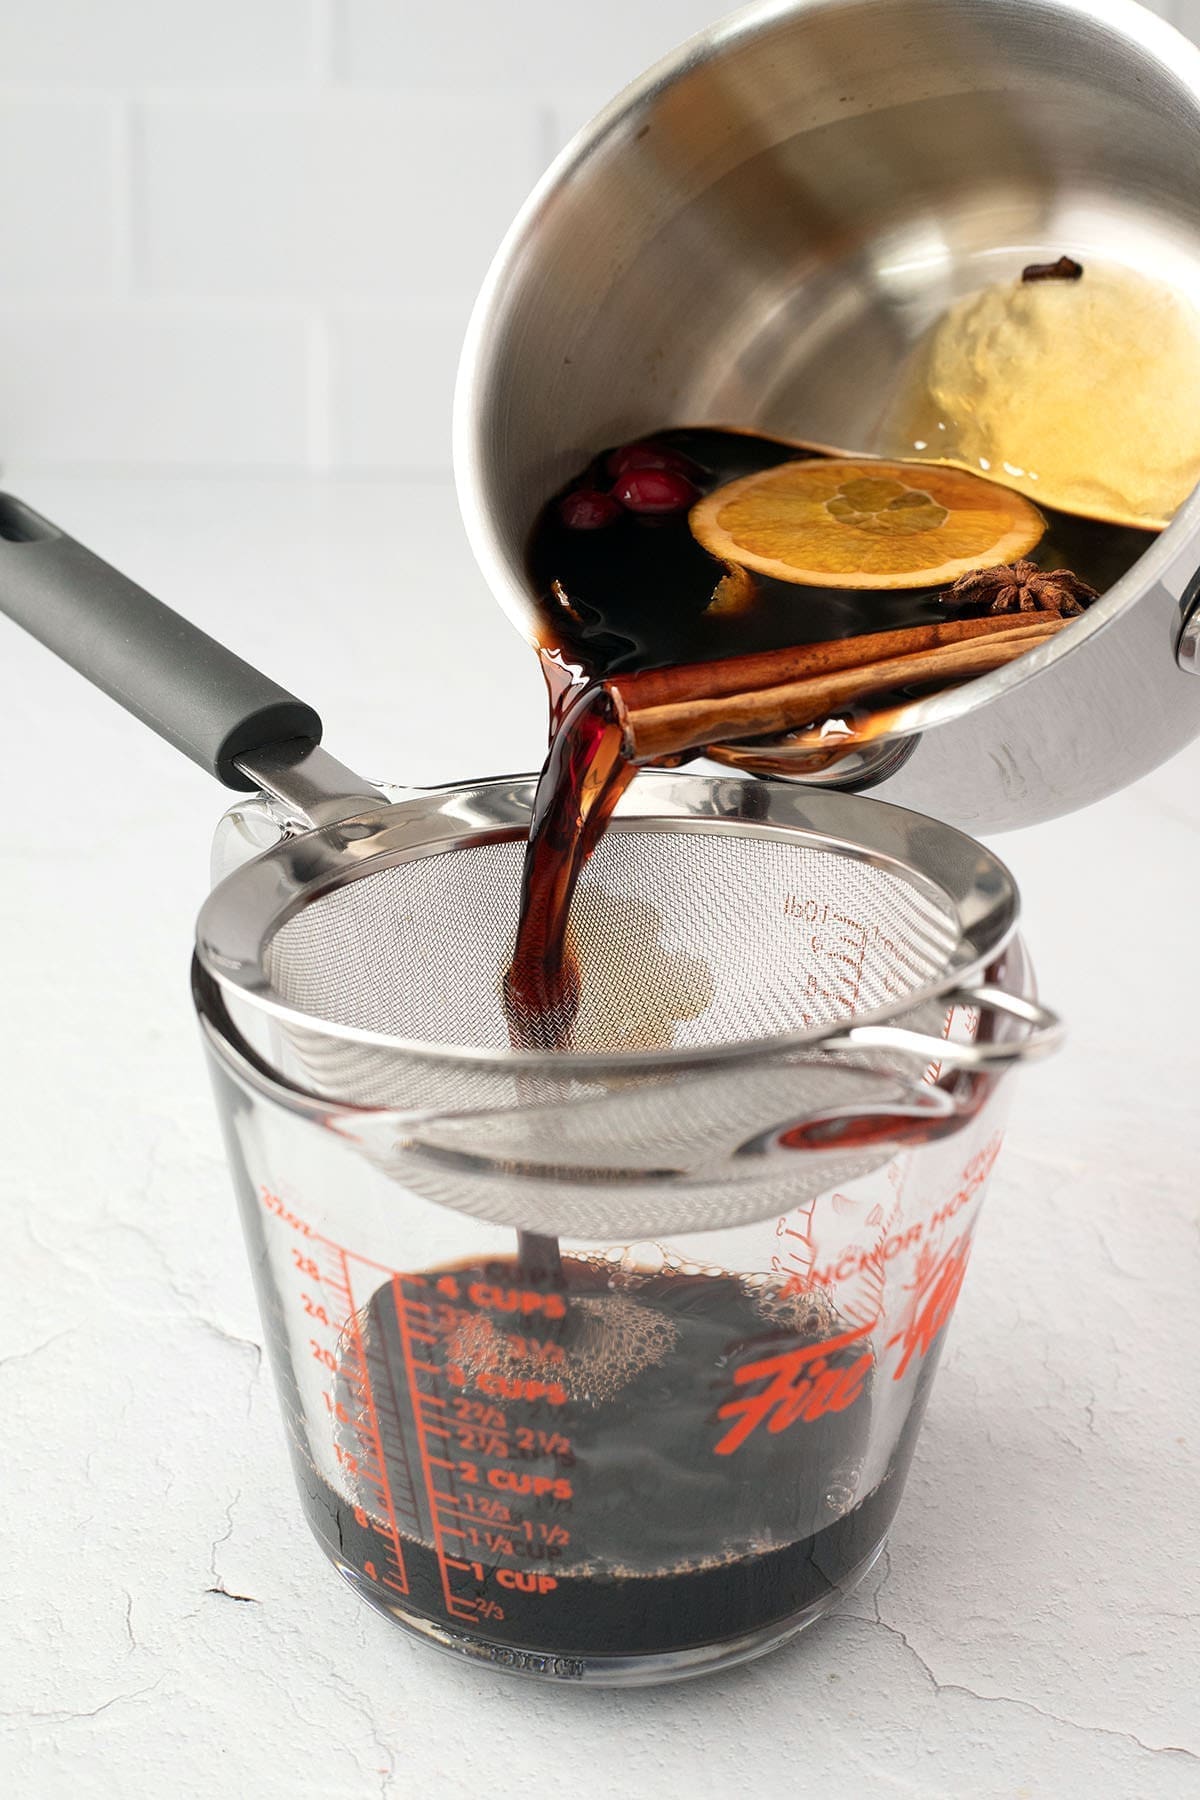 Saucepan of warm red wine being poured through a sieve.